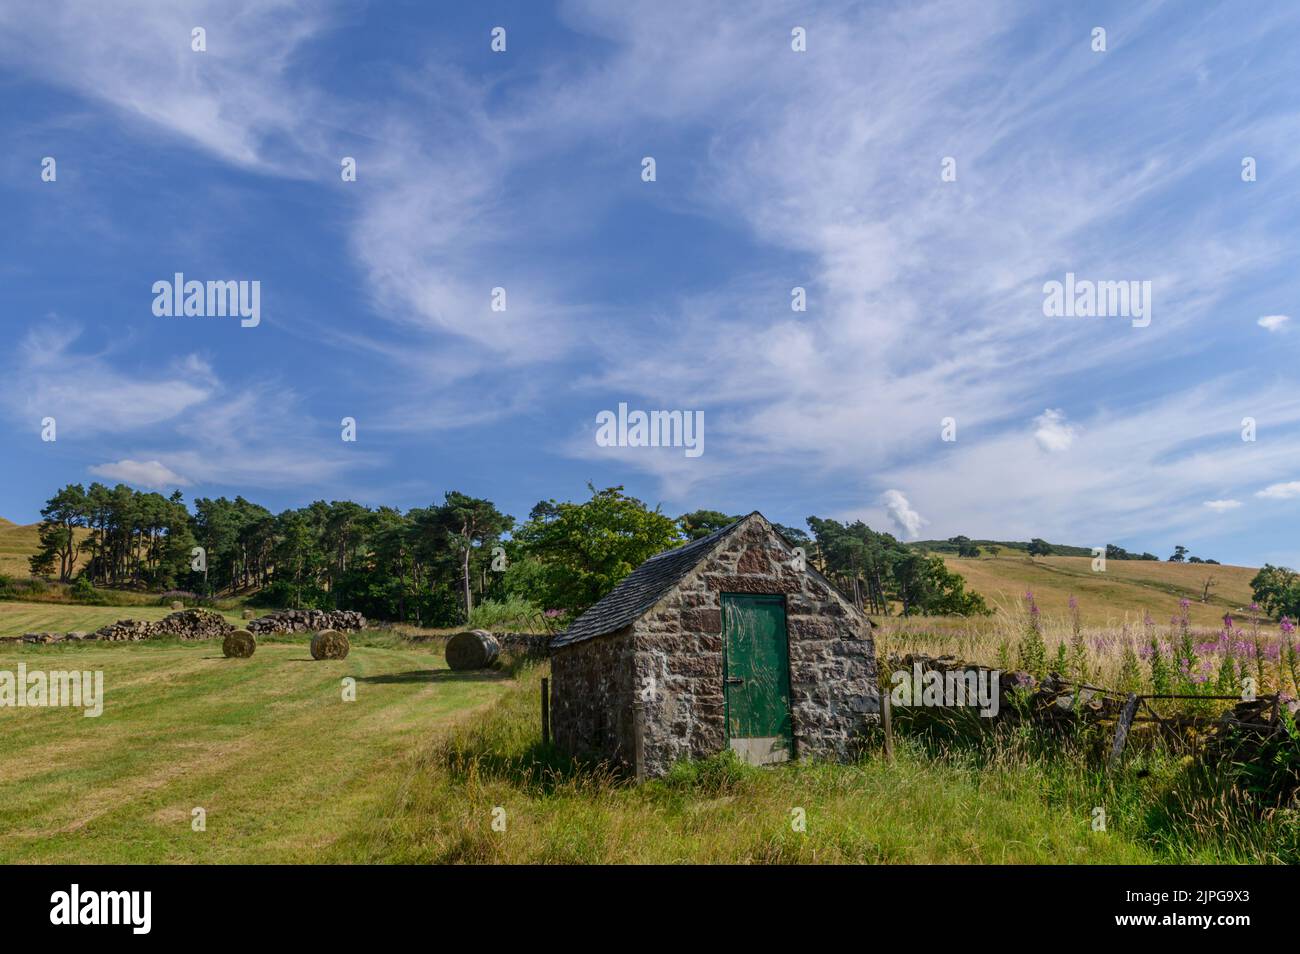 Borders landscape at Halmyre Mains near West Linton in The Scottish Borders Stock Photo